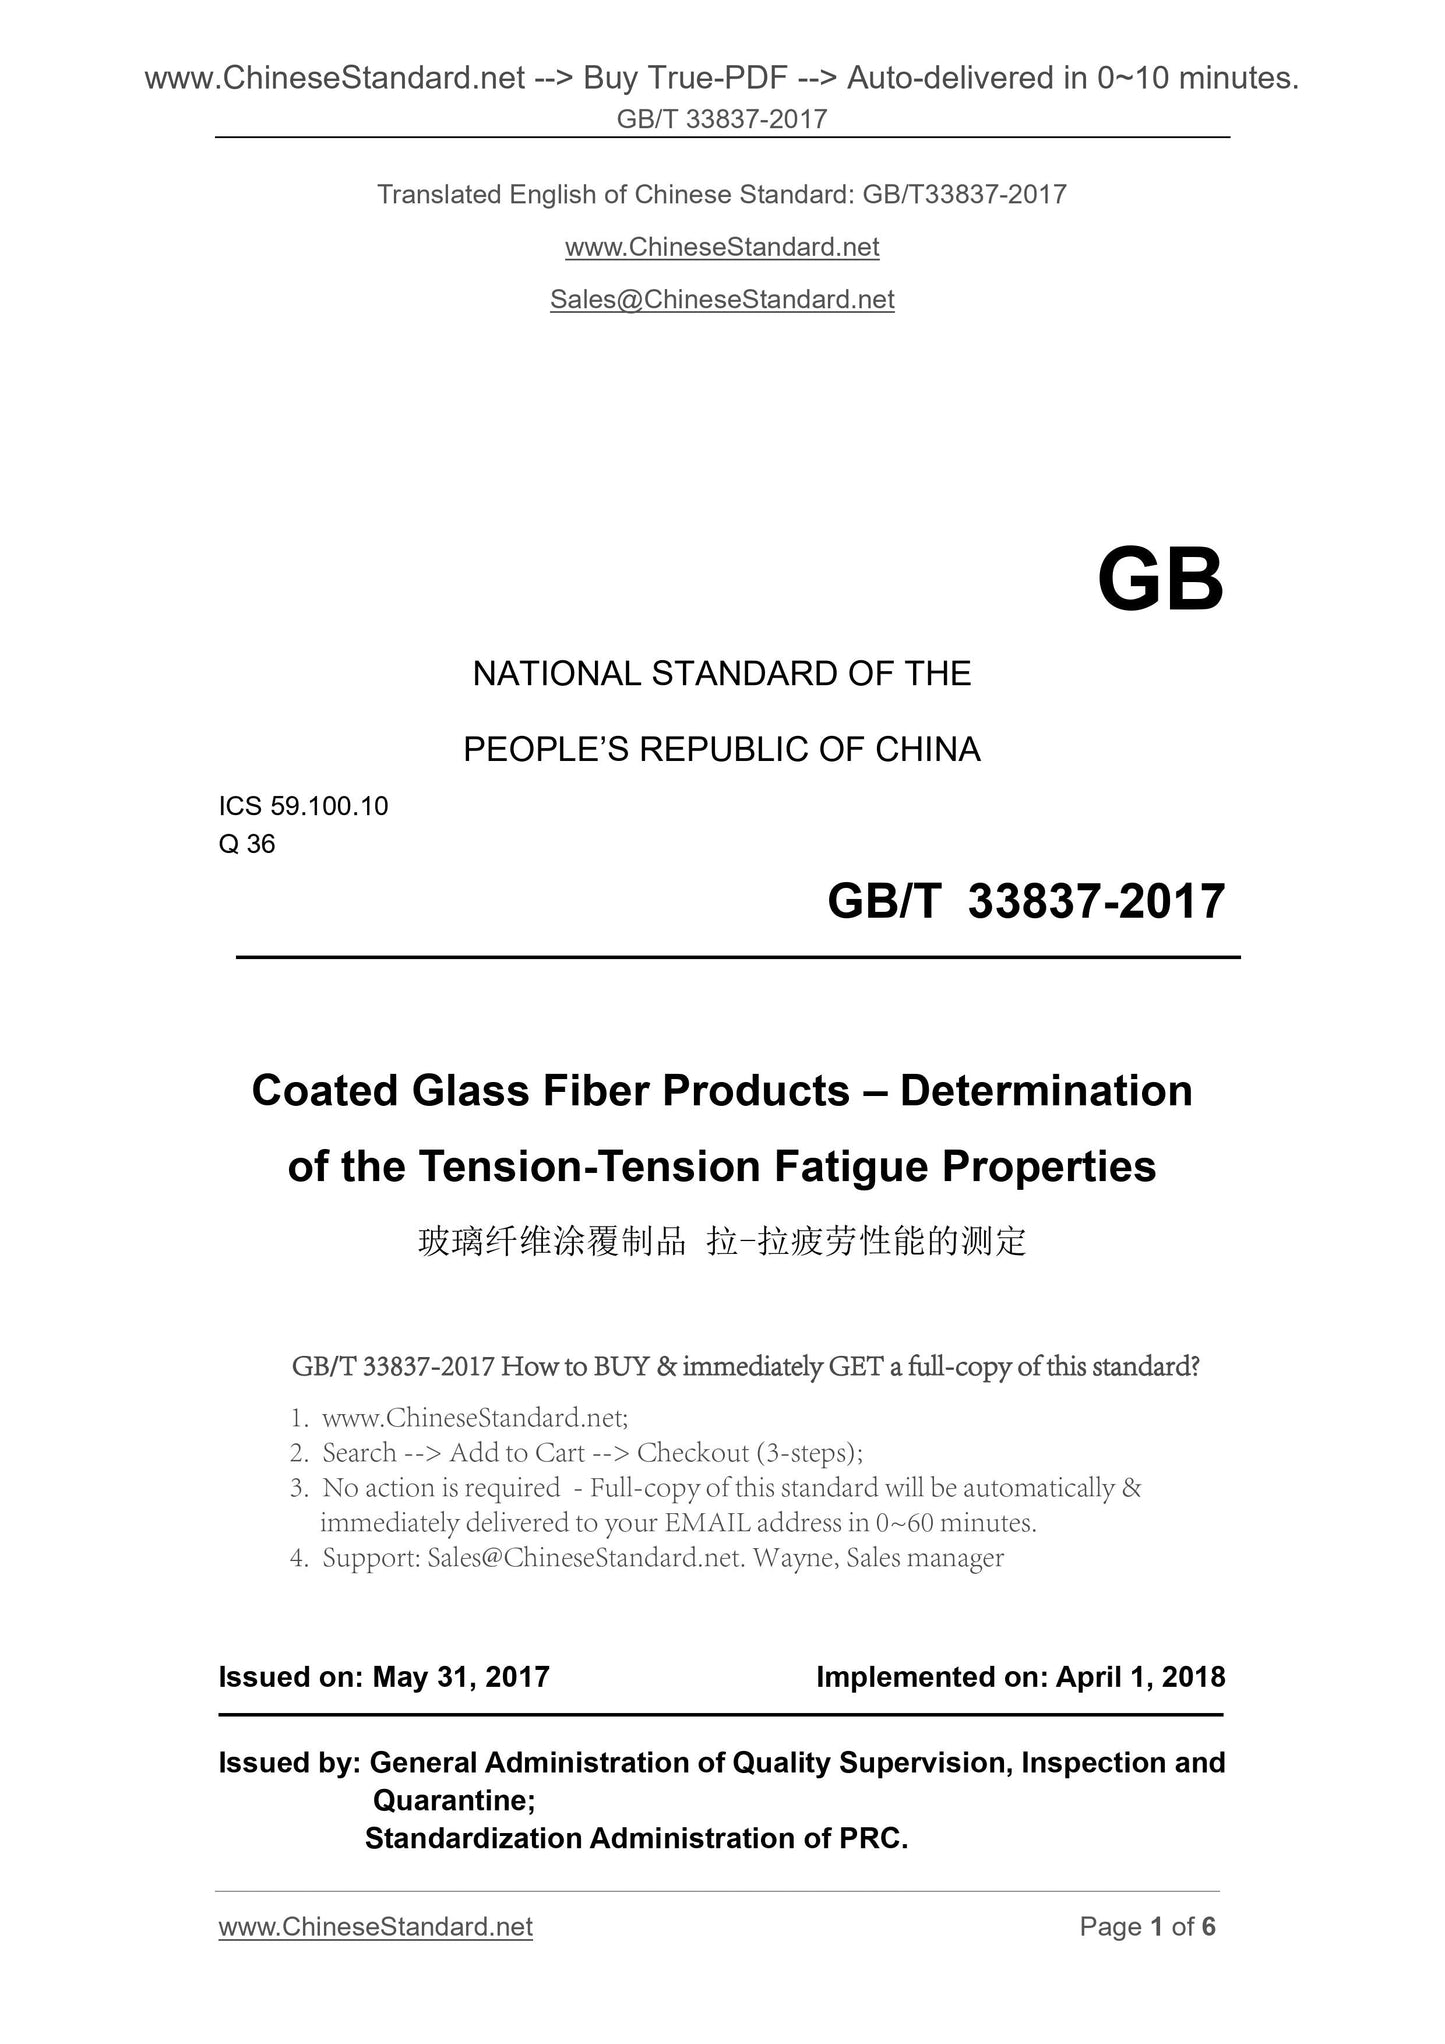 GB/T 33837-2017 Page 1